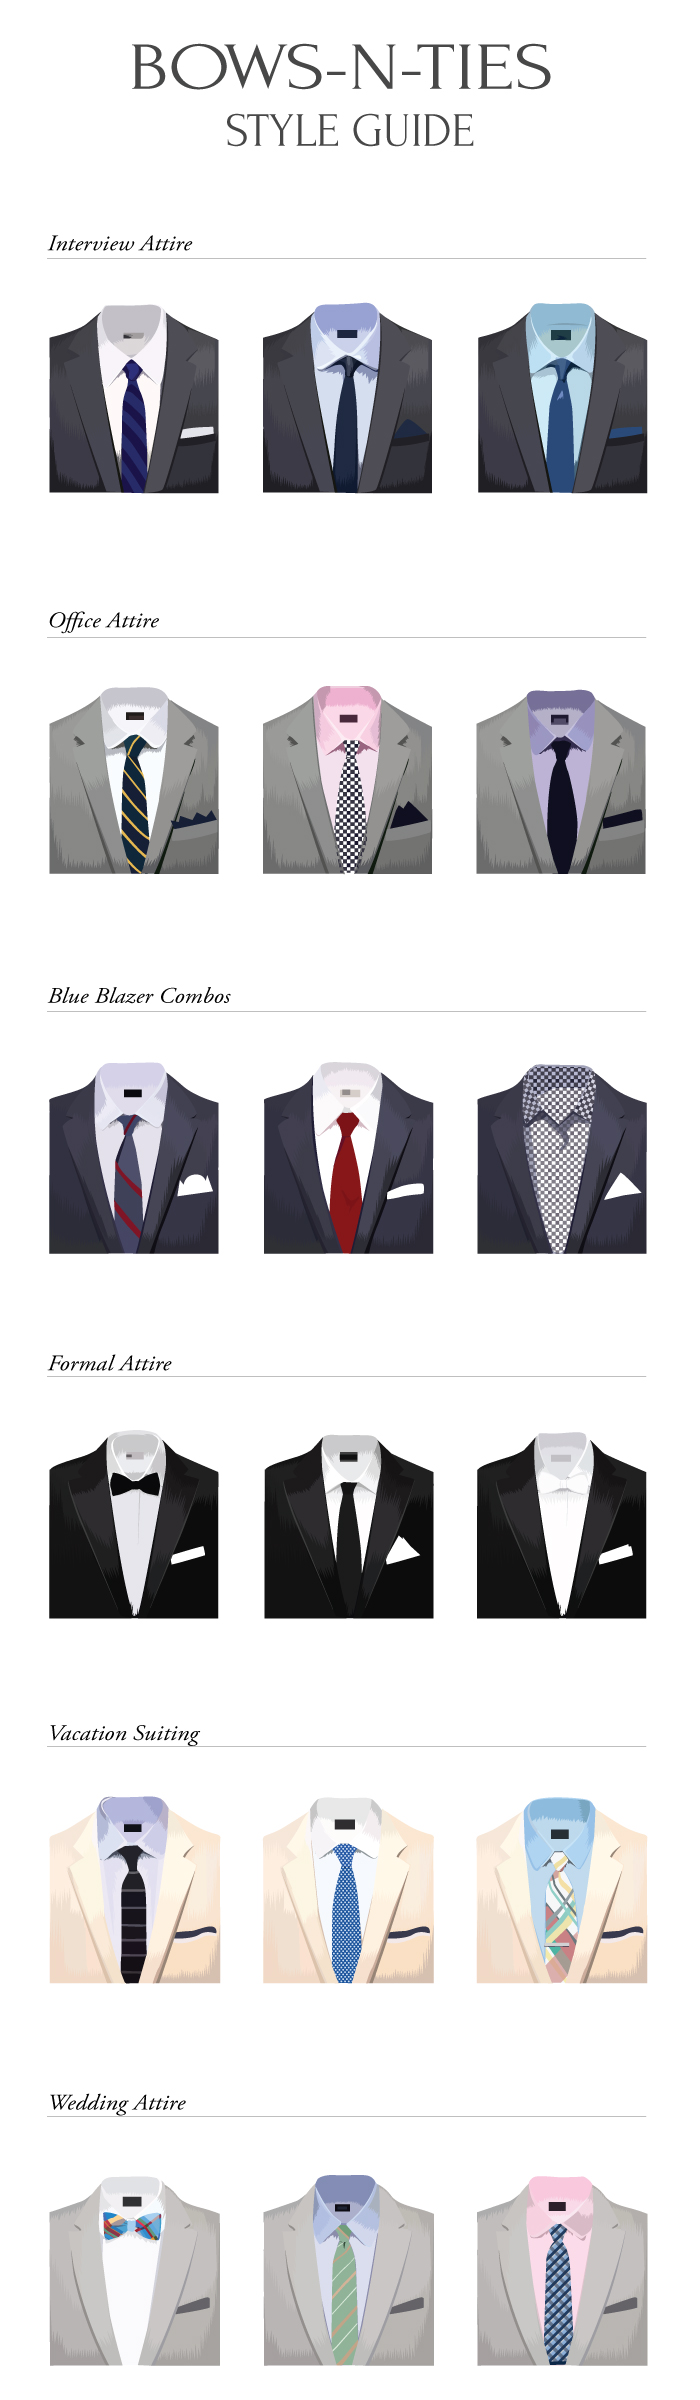 Style Chart For Men For All Attire